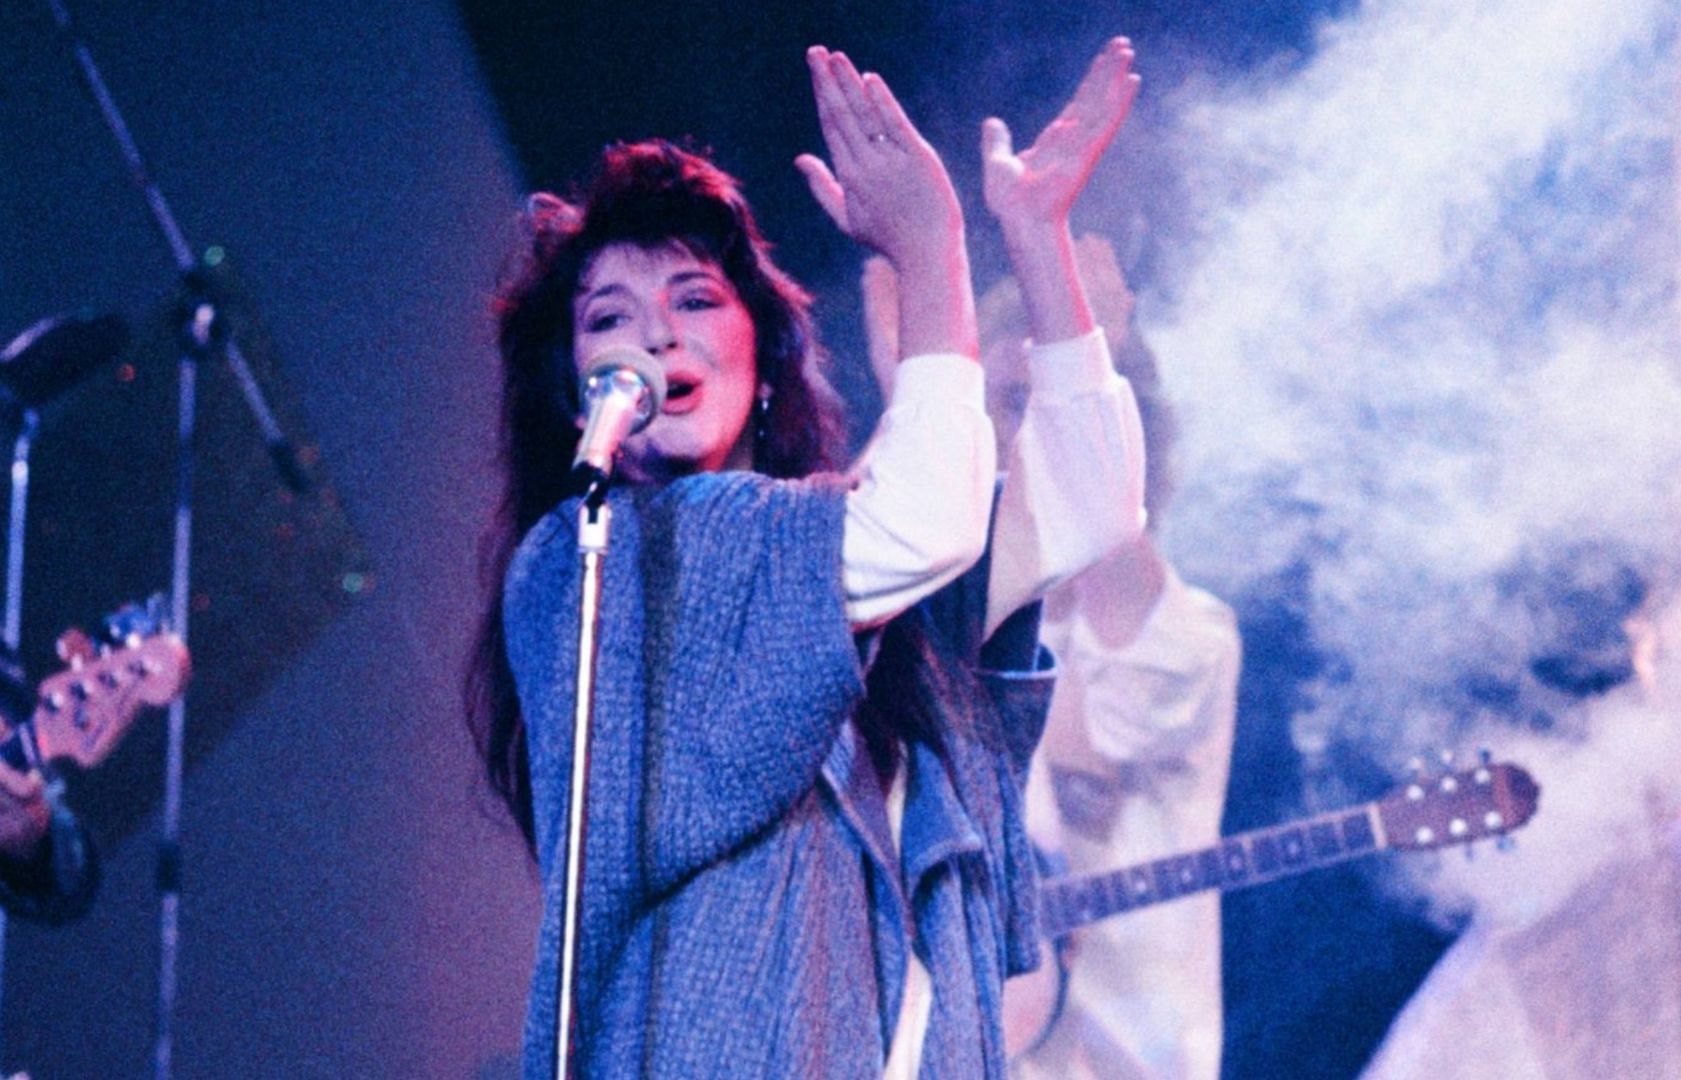 &#039;Running Up That Hill&#039; by Kate Bush has peaked the charts in various countries (Image via Getty)